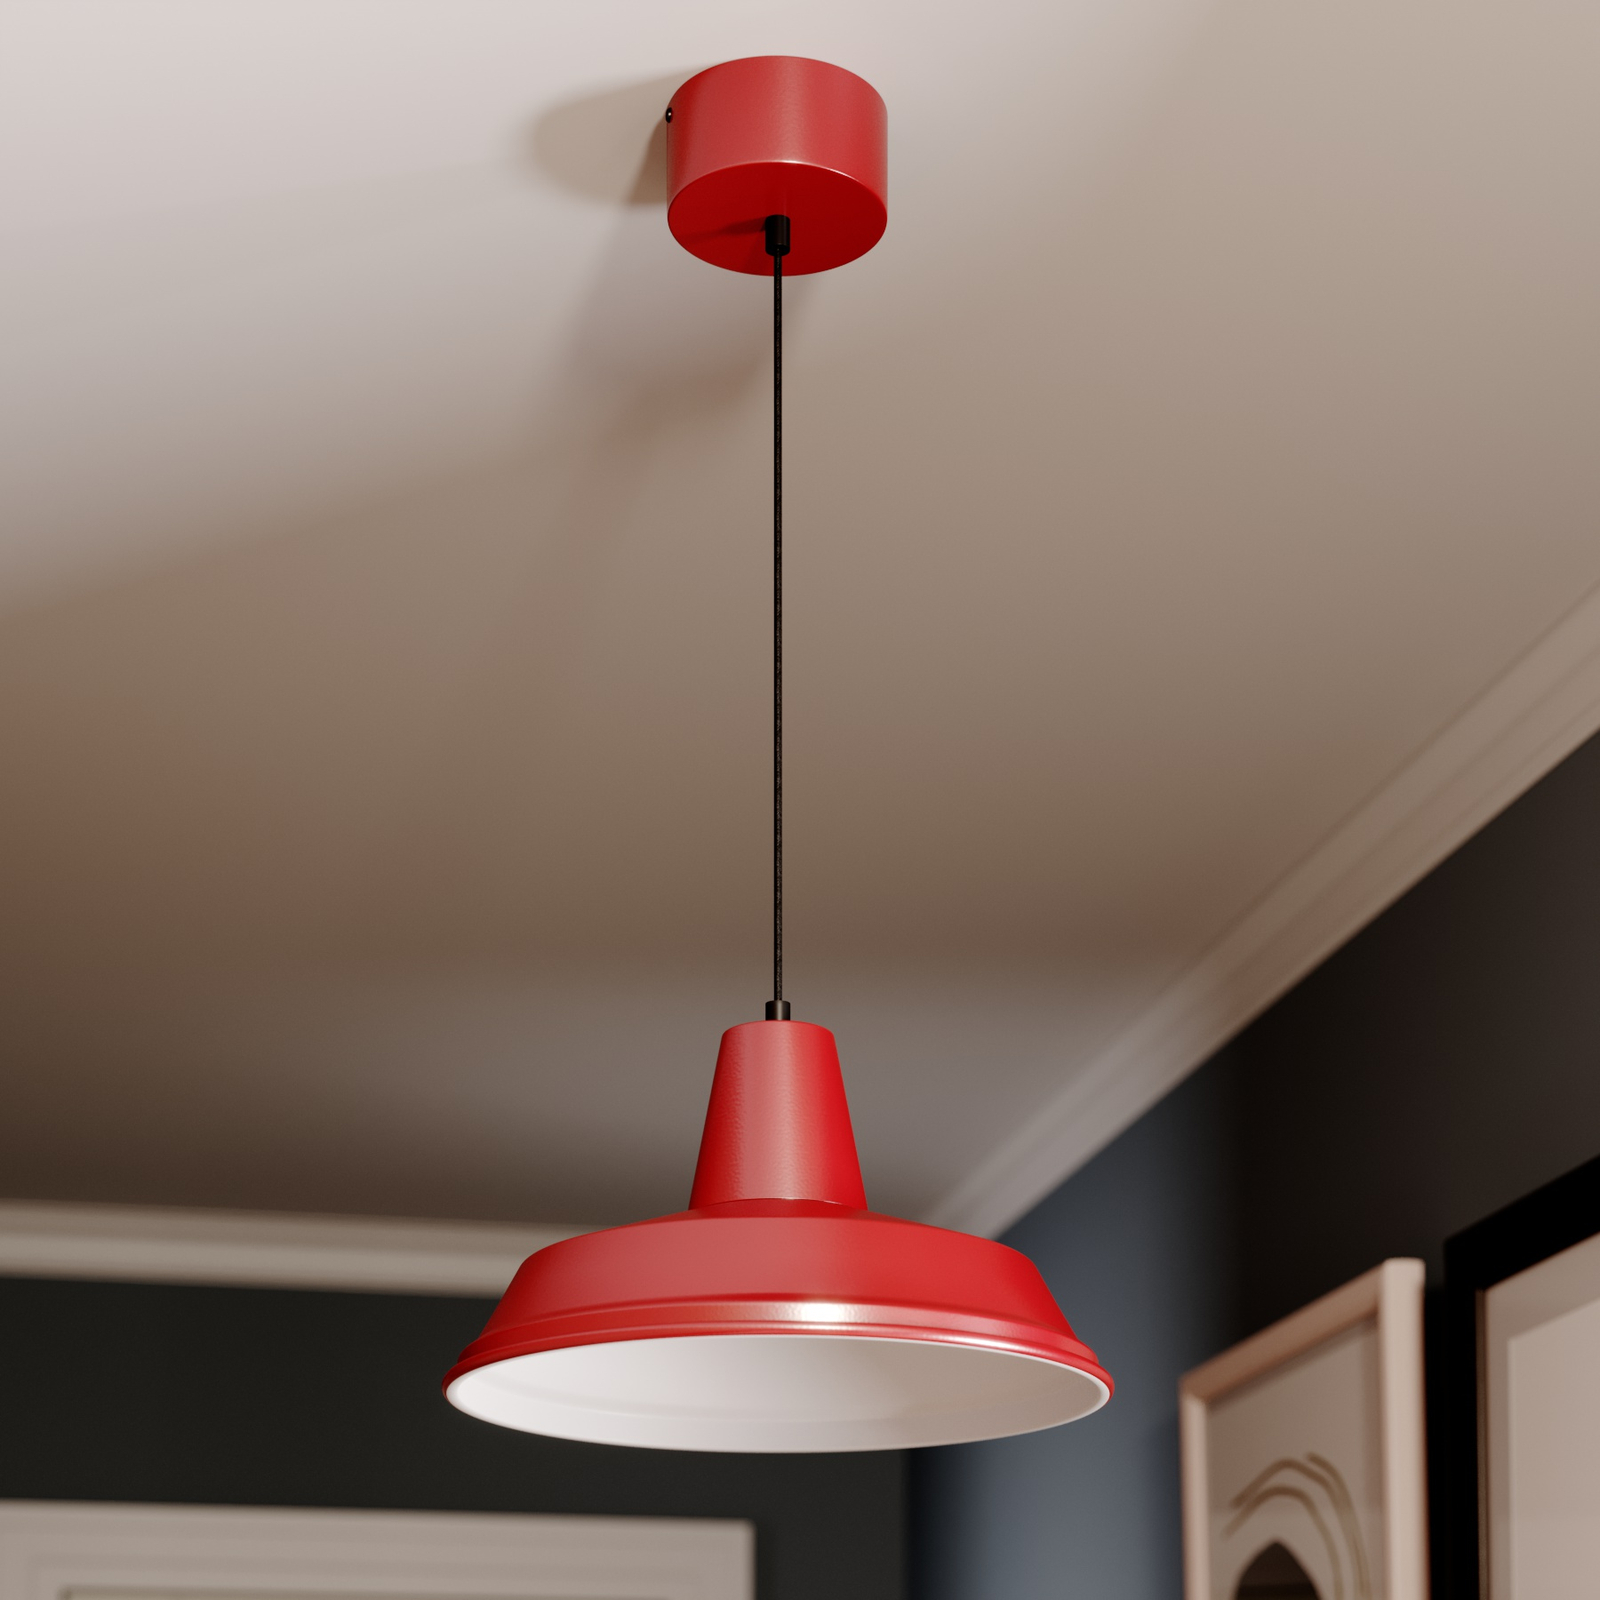 Hanglamp Class, rood/wit Lampen24.nl